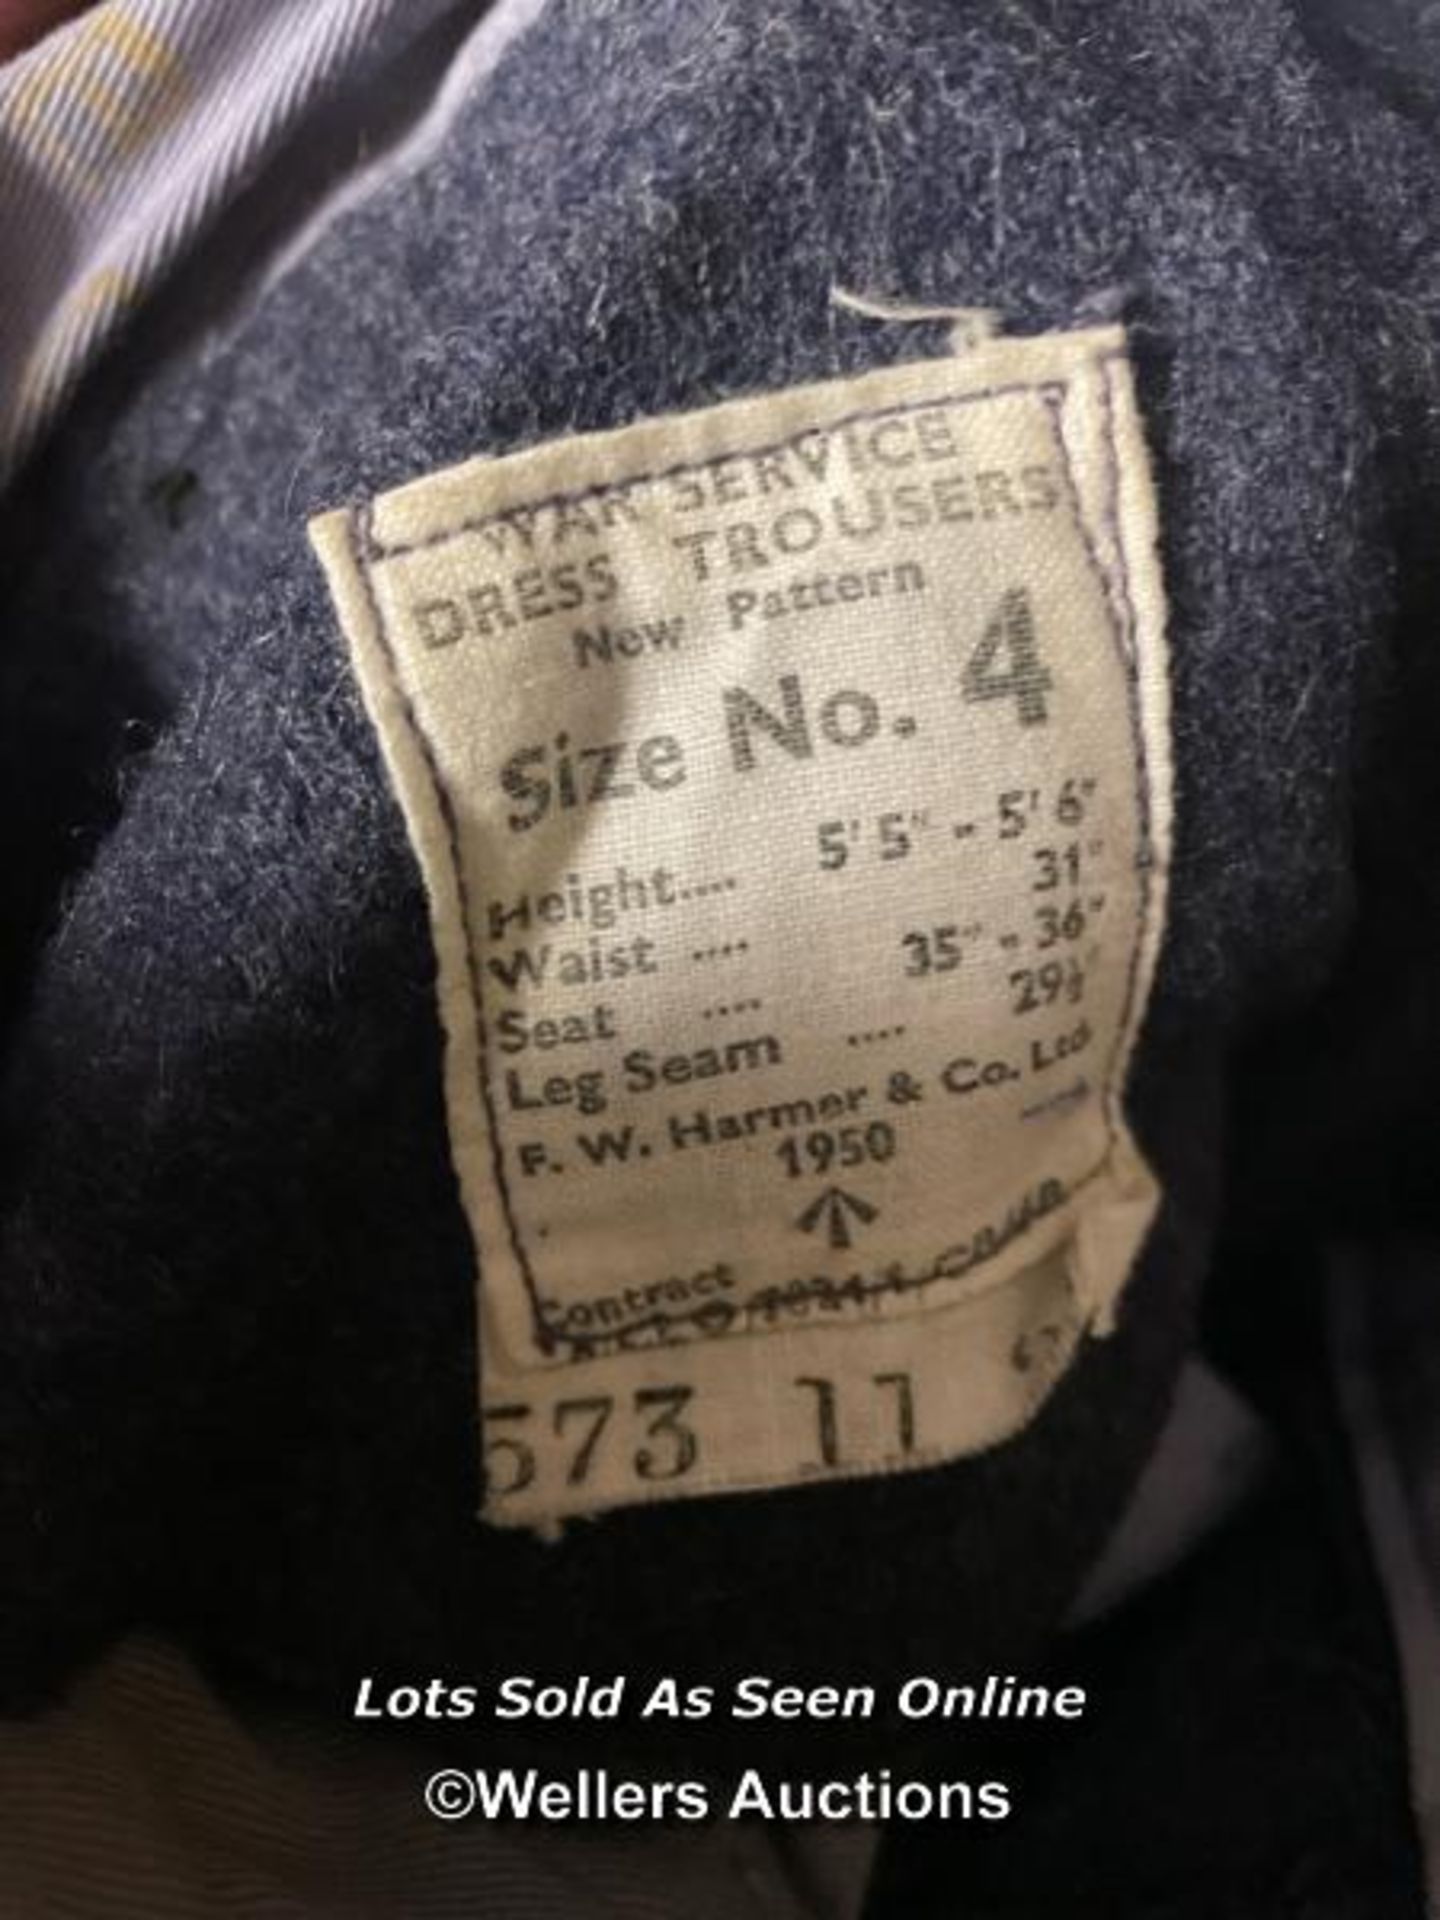 THREE R.A.F. JACKETS, AND TWO PAIRS OF TROUSERS (SEE IMAGES FOR DETAIL) - Image 6 of 6